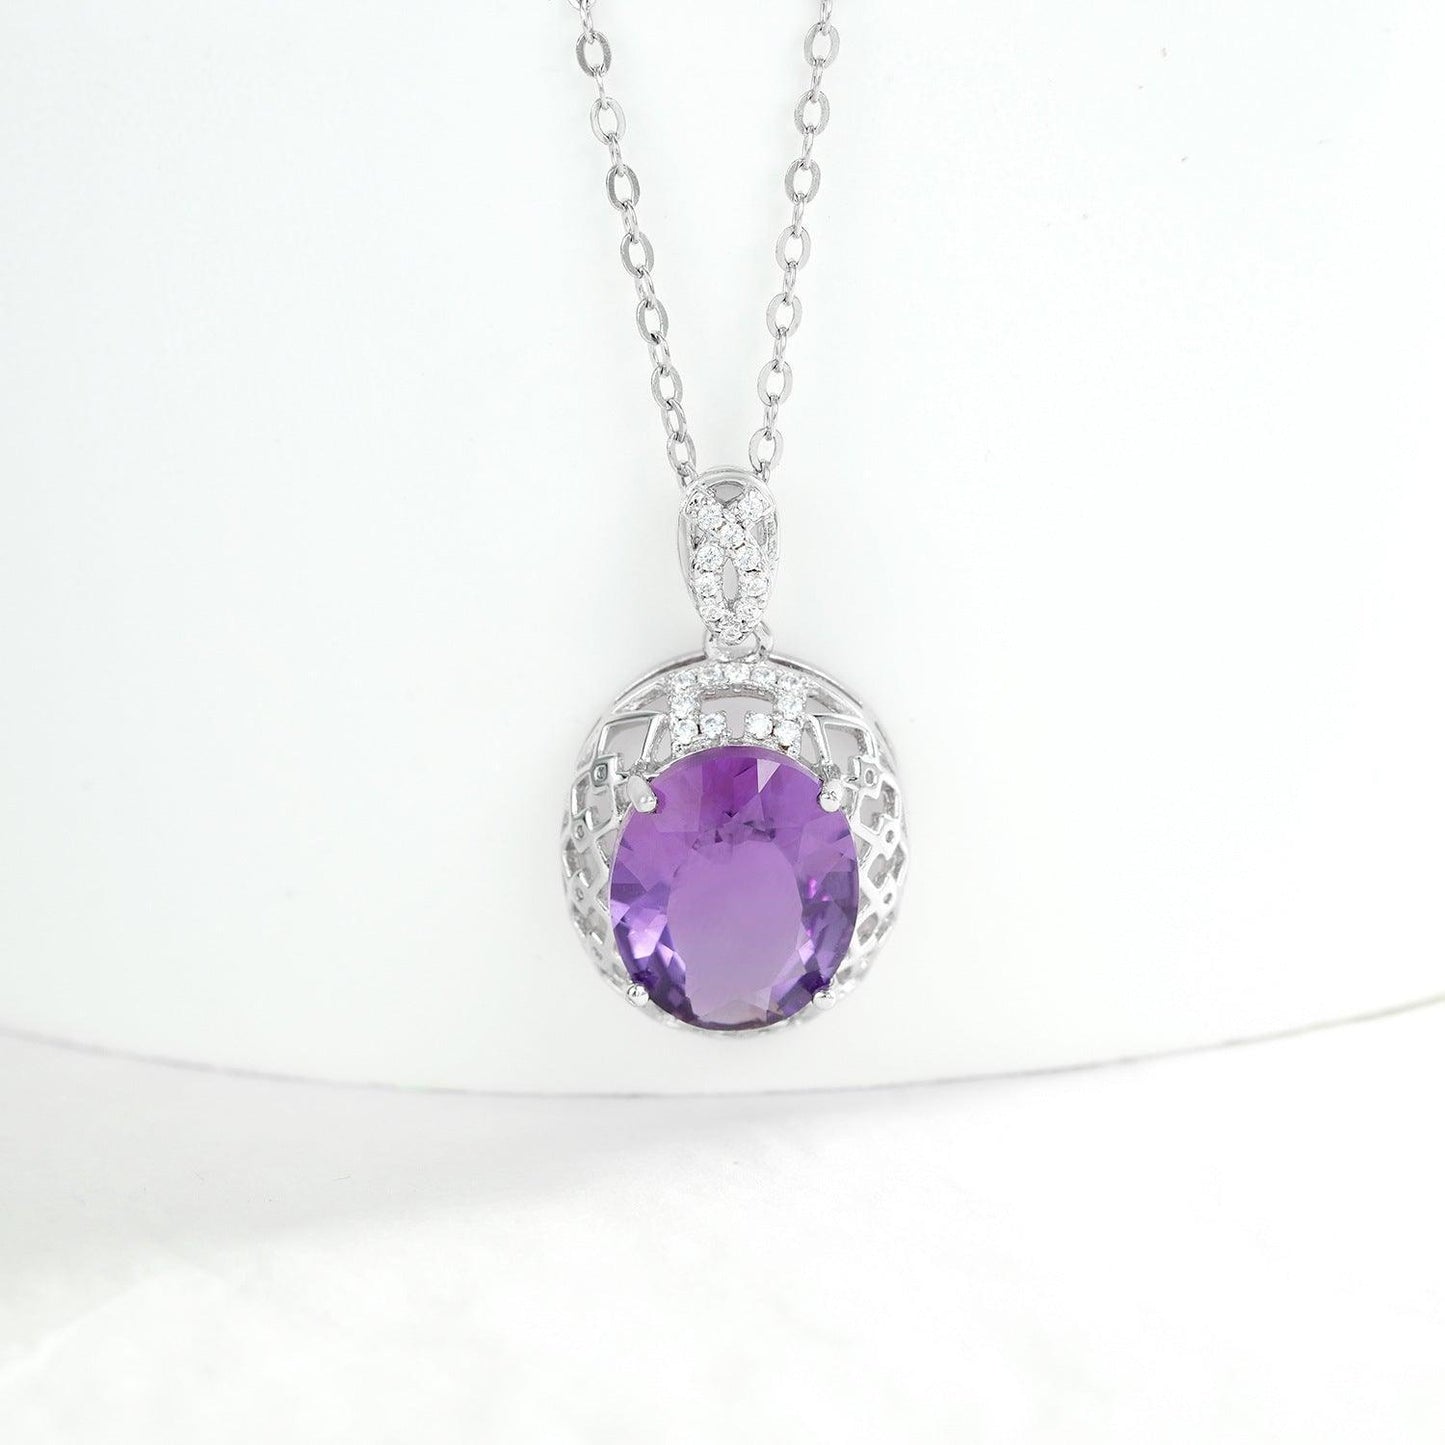 High-grade Amethyst Pendant Necklace for Christmas 2023 | High-grade Amethyst Pendant Necklace - undefined | Amethyst Pendant Necklace, High-grade Amethyst Necklace, Sterling Silver s925 necklace | From Hunny Life | hunnylife.com